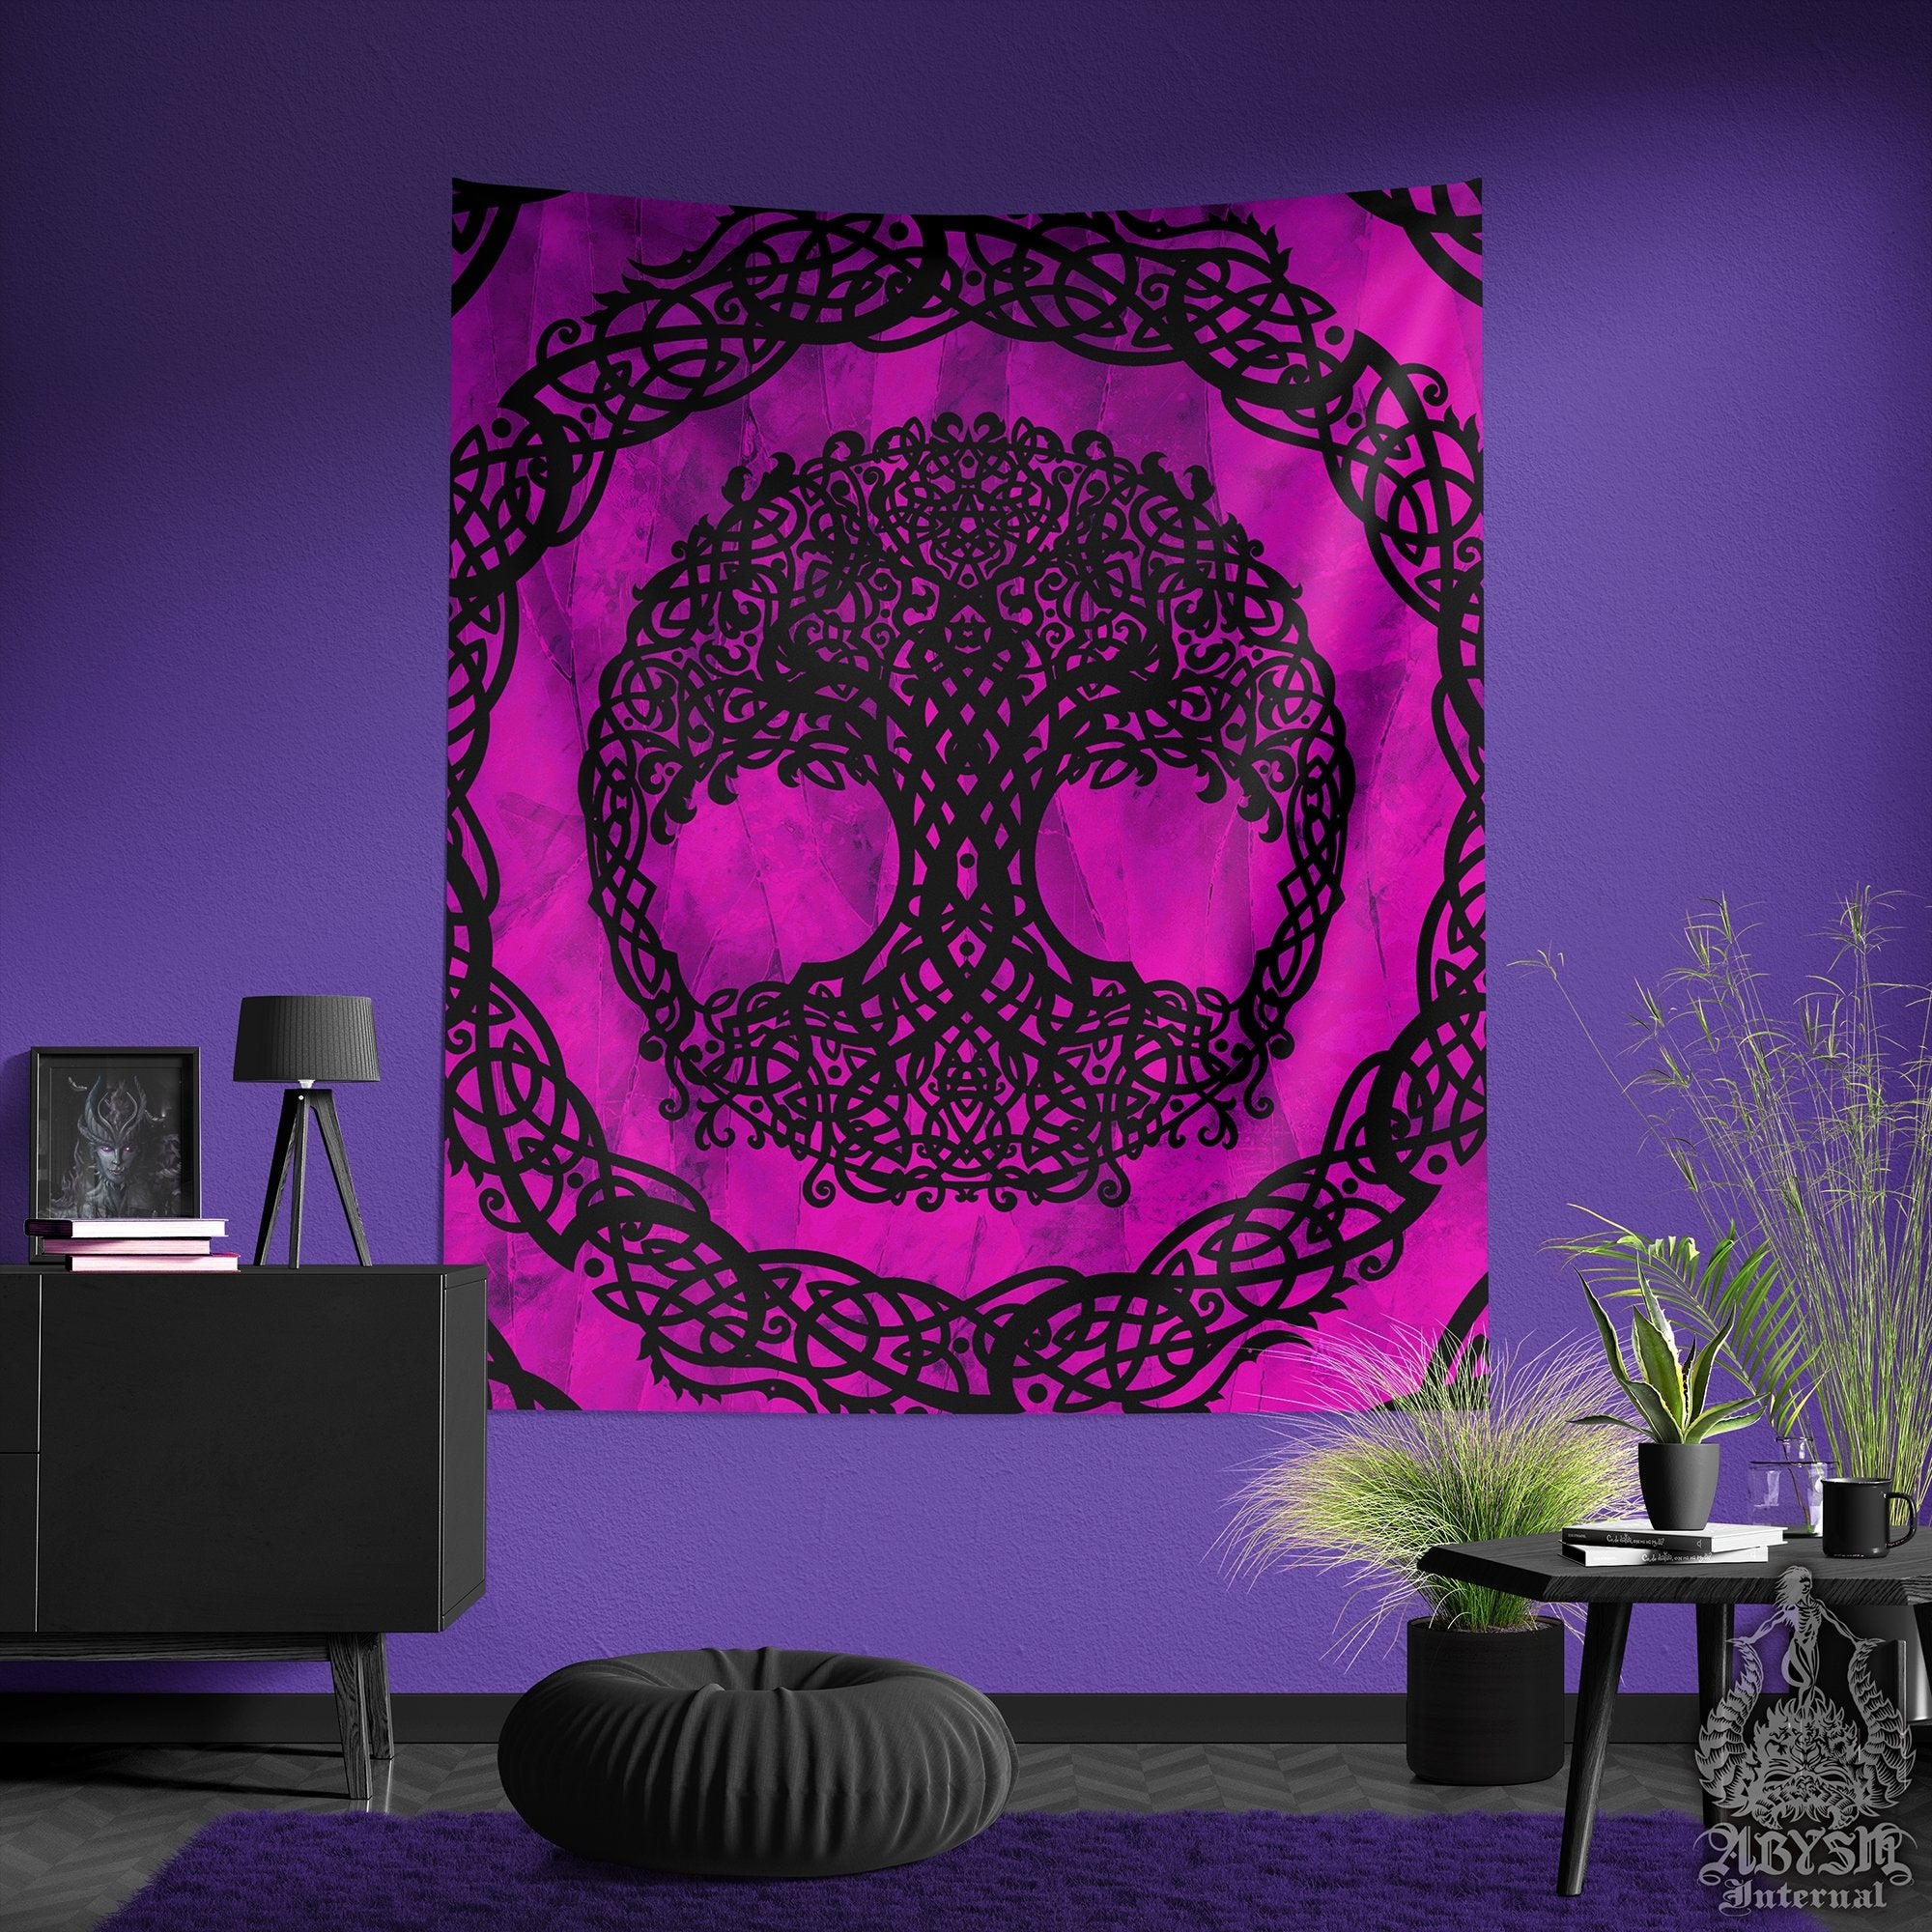 Witchy Tree of Life Tapestry, Celtic Wall Hanging, Pagan and Wiccan Home Decor, With Art Print - Pink and Black - Abysm Internal